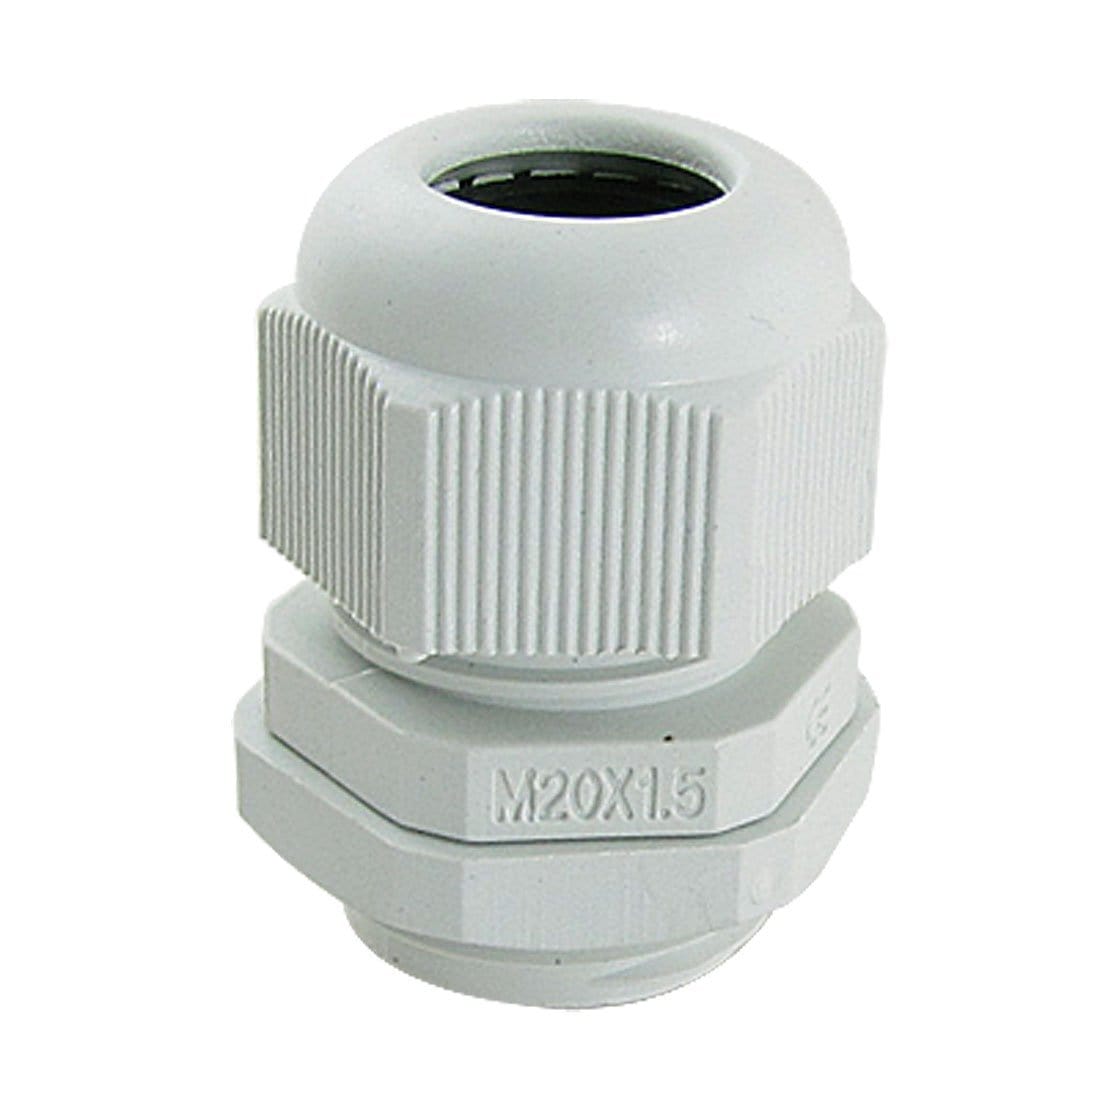 Chrome Cable Gland - Stylish and Secure Cable Management at Supply Master Electrical Accessories Buy Tools hardware Building materials